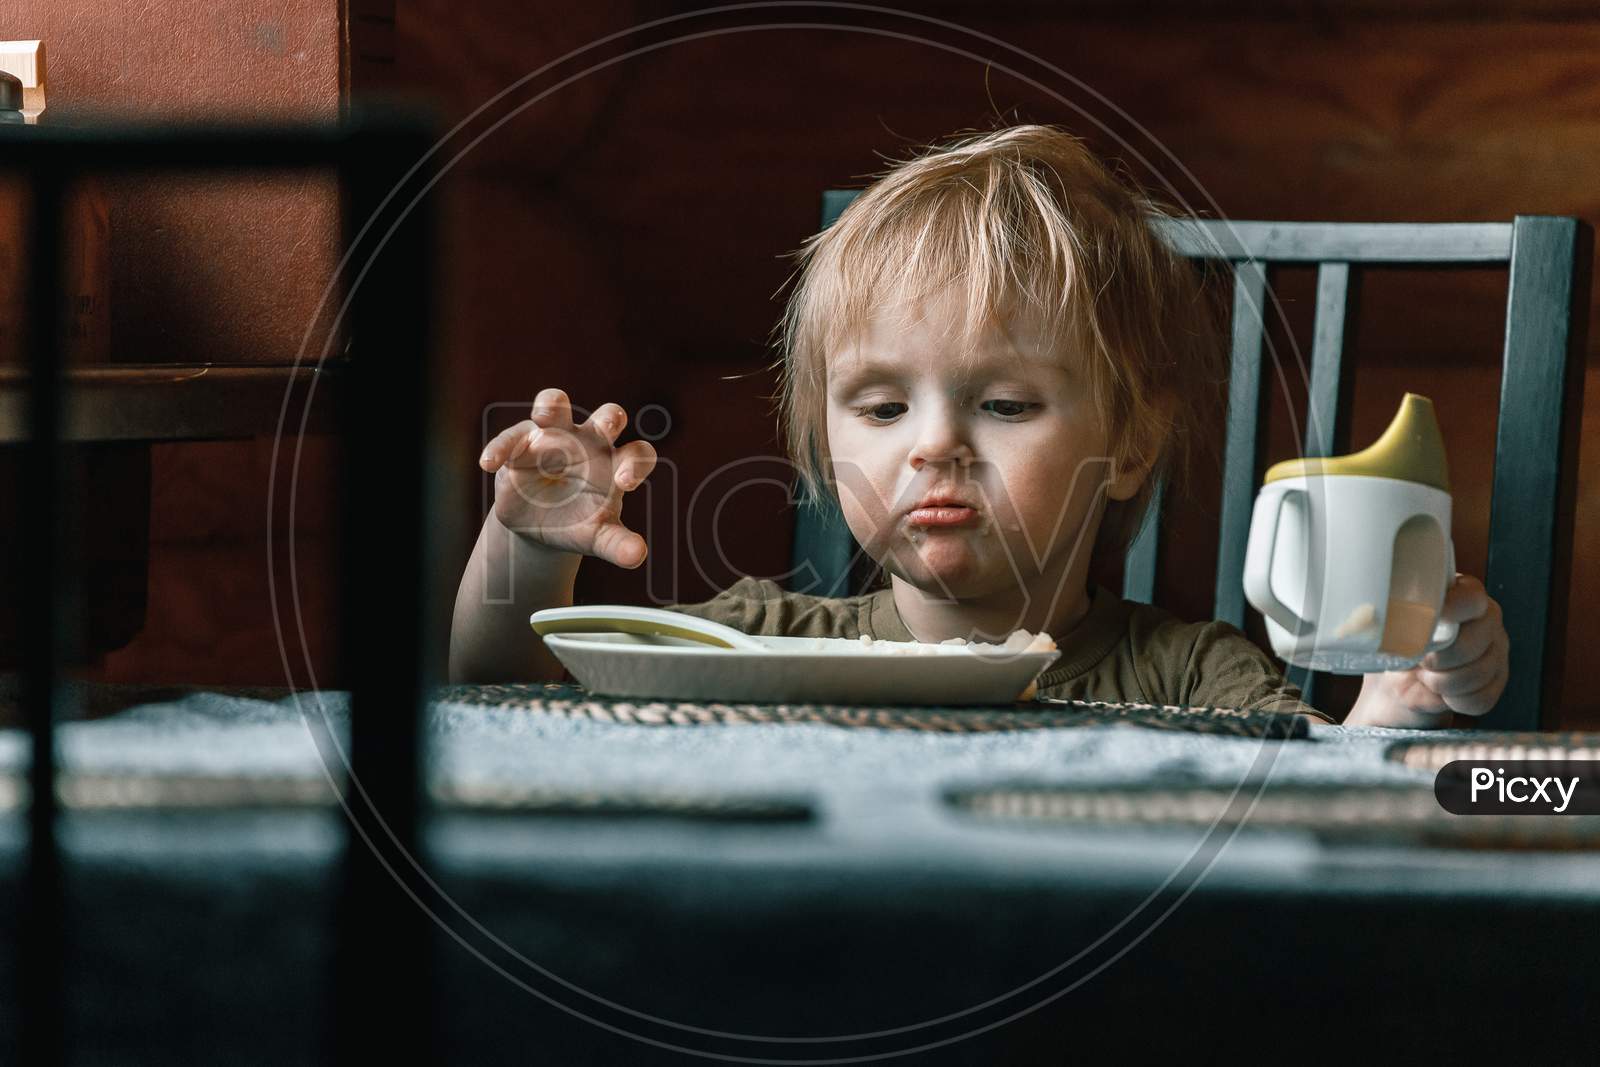 A Toddler Boy On A Chair Holds A Plastic Spoon And Eats His Lunch. Feeding Process. An Infant Child Learns To Eat. Baby Food, Family, Child, Food